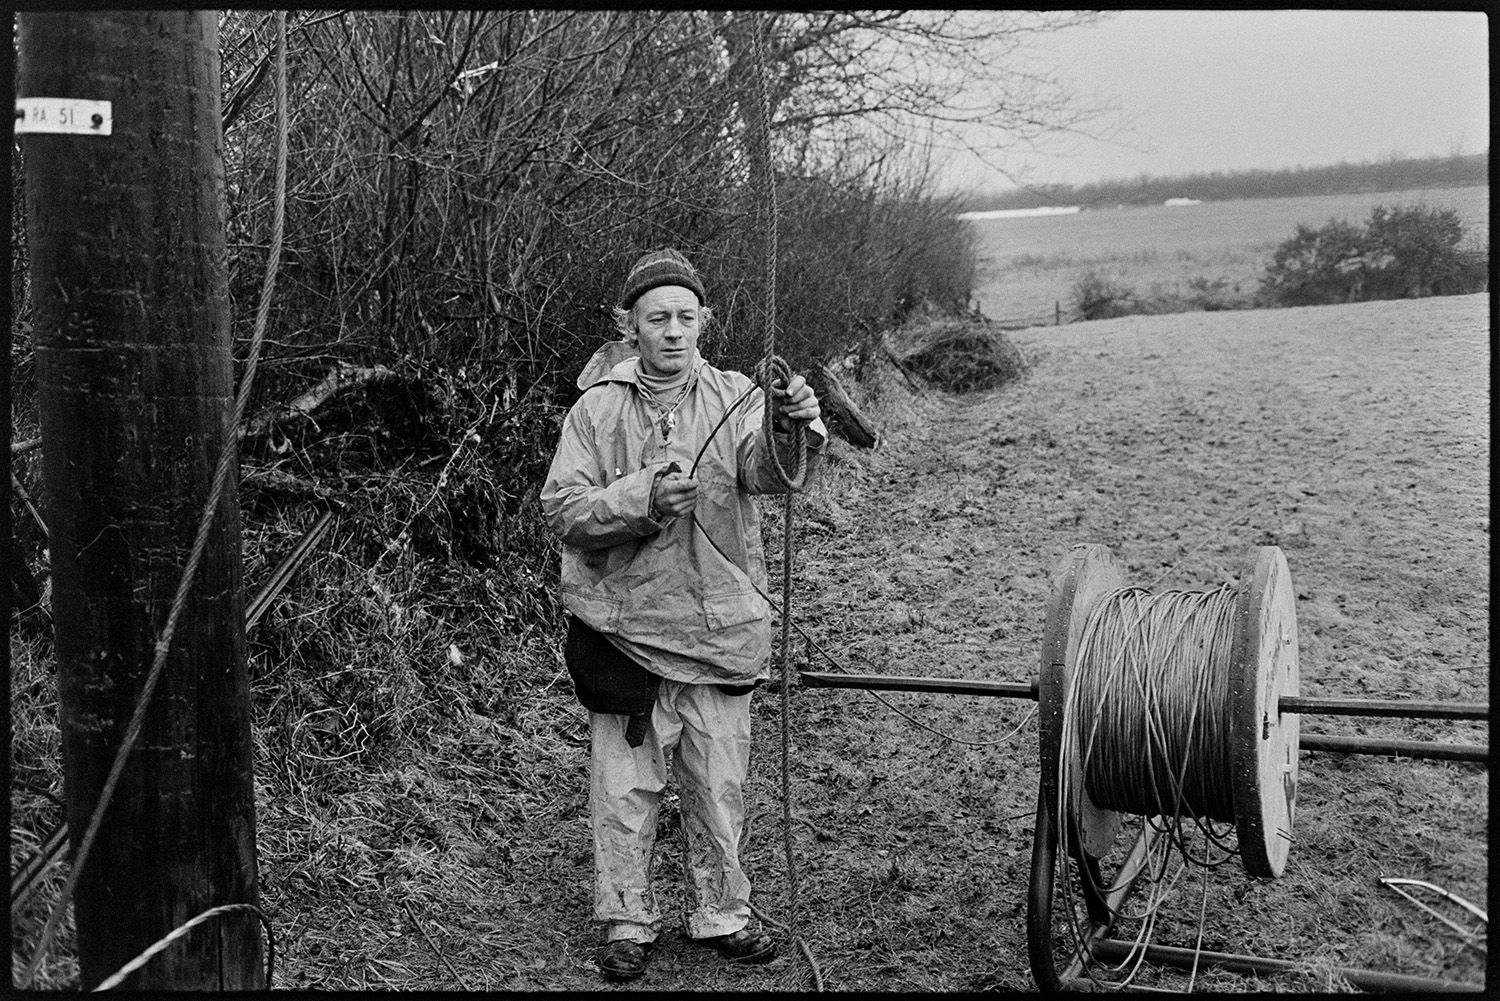 Men replacing electricity power lines, Land Rover and drums of cable. 
[A man from SWEB replacing electricity power cables at Dolton. He is stood in a field by a utility pole, next to a drum with a large reel of cable.]